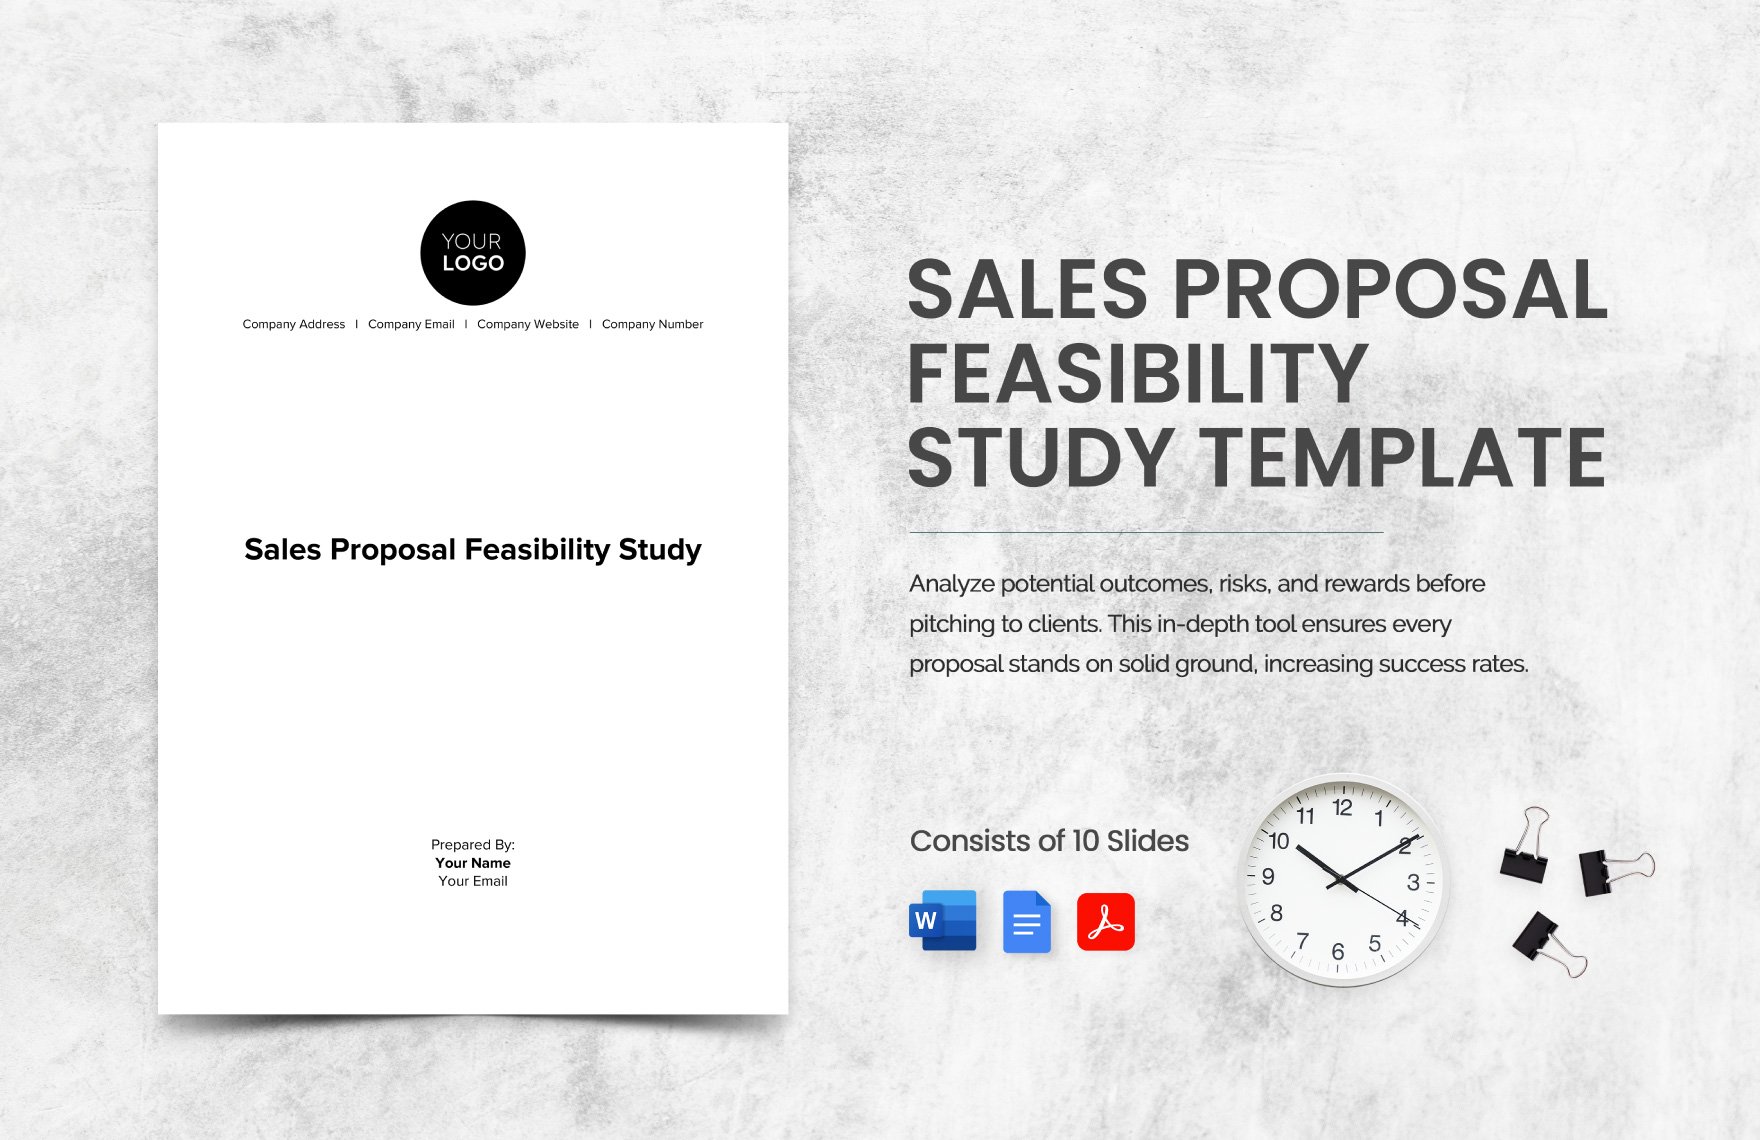 Sales Proposal Feasibility Study Template in Word, Google Docs, PDF